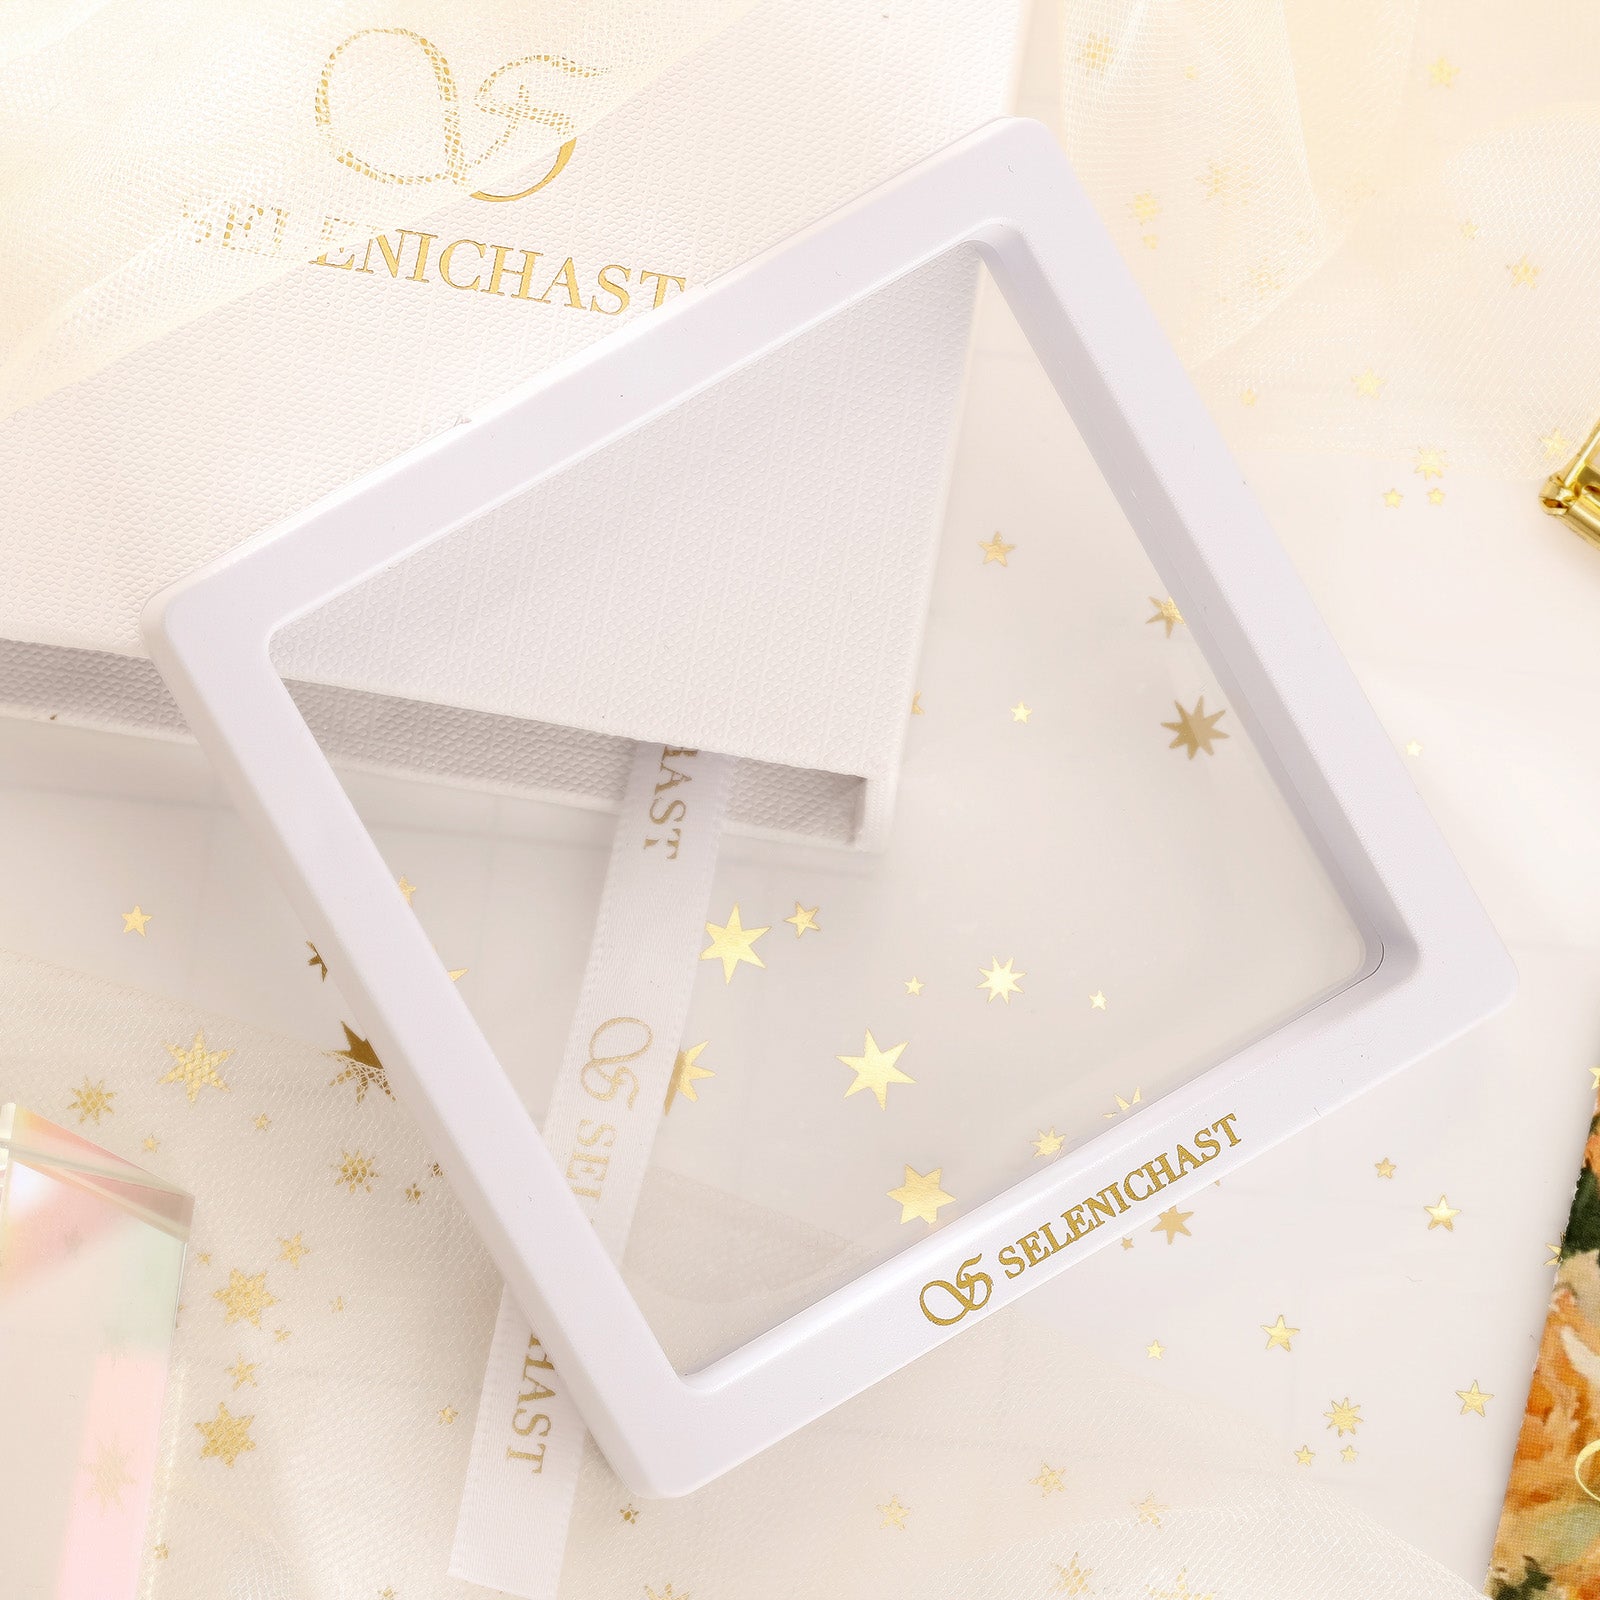 Selenichast Jewelry Box Five Pack Gifts for Friend